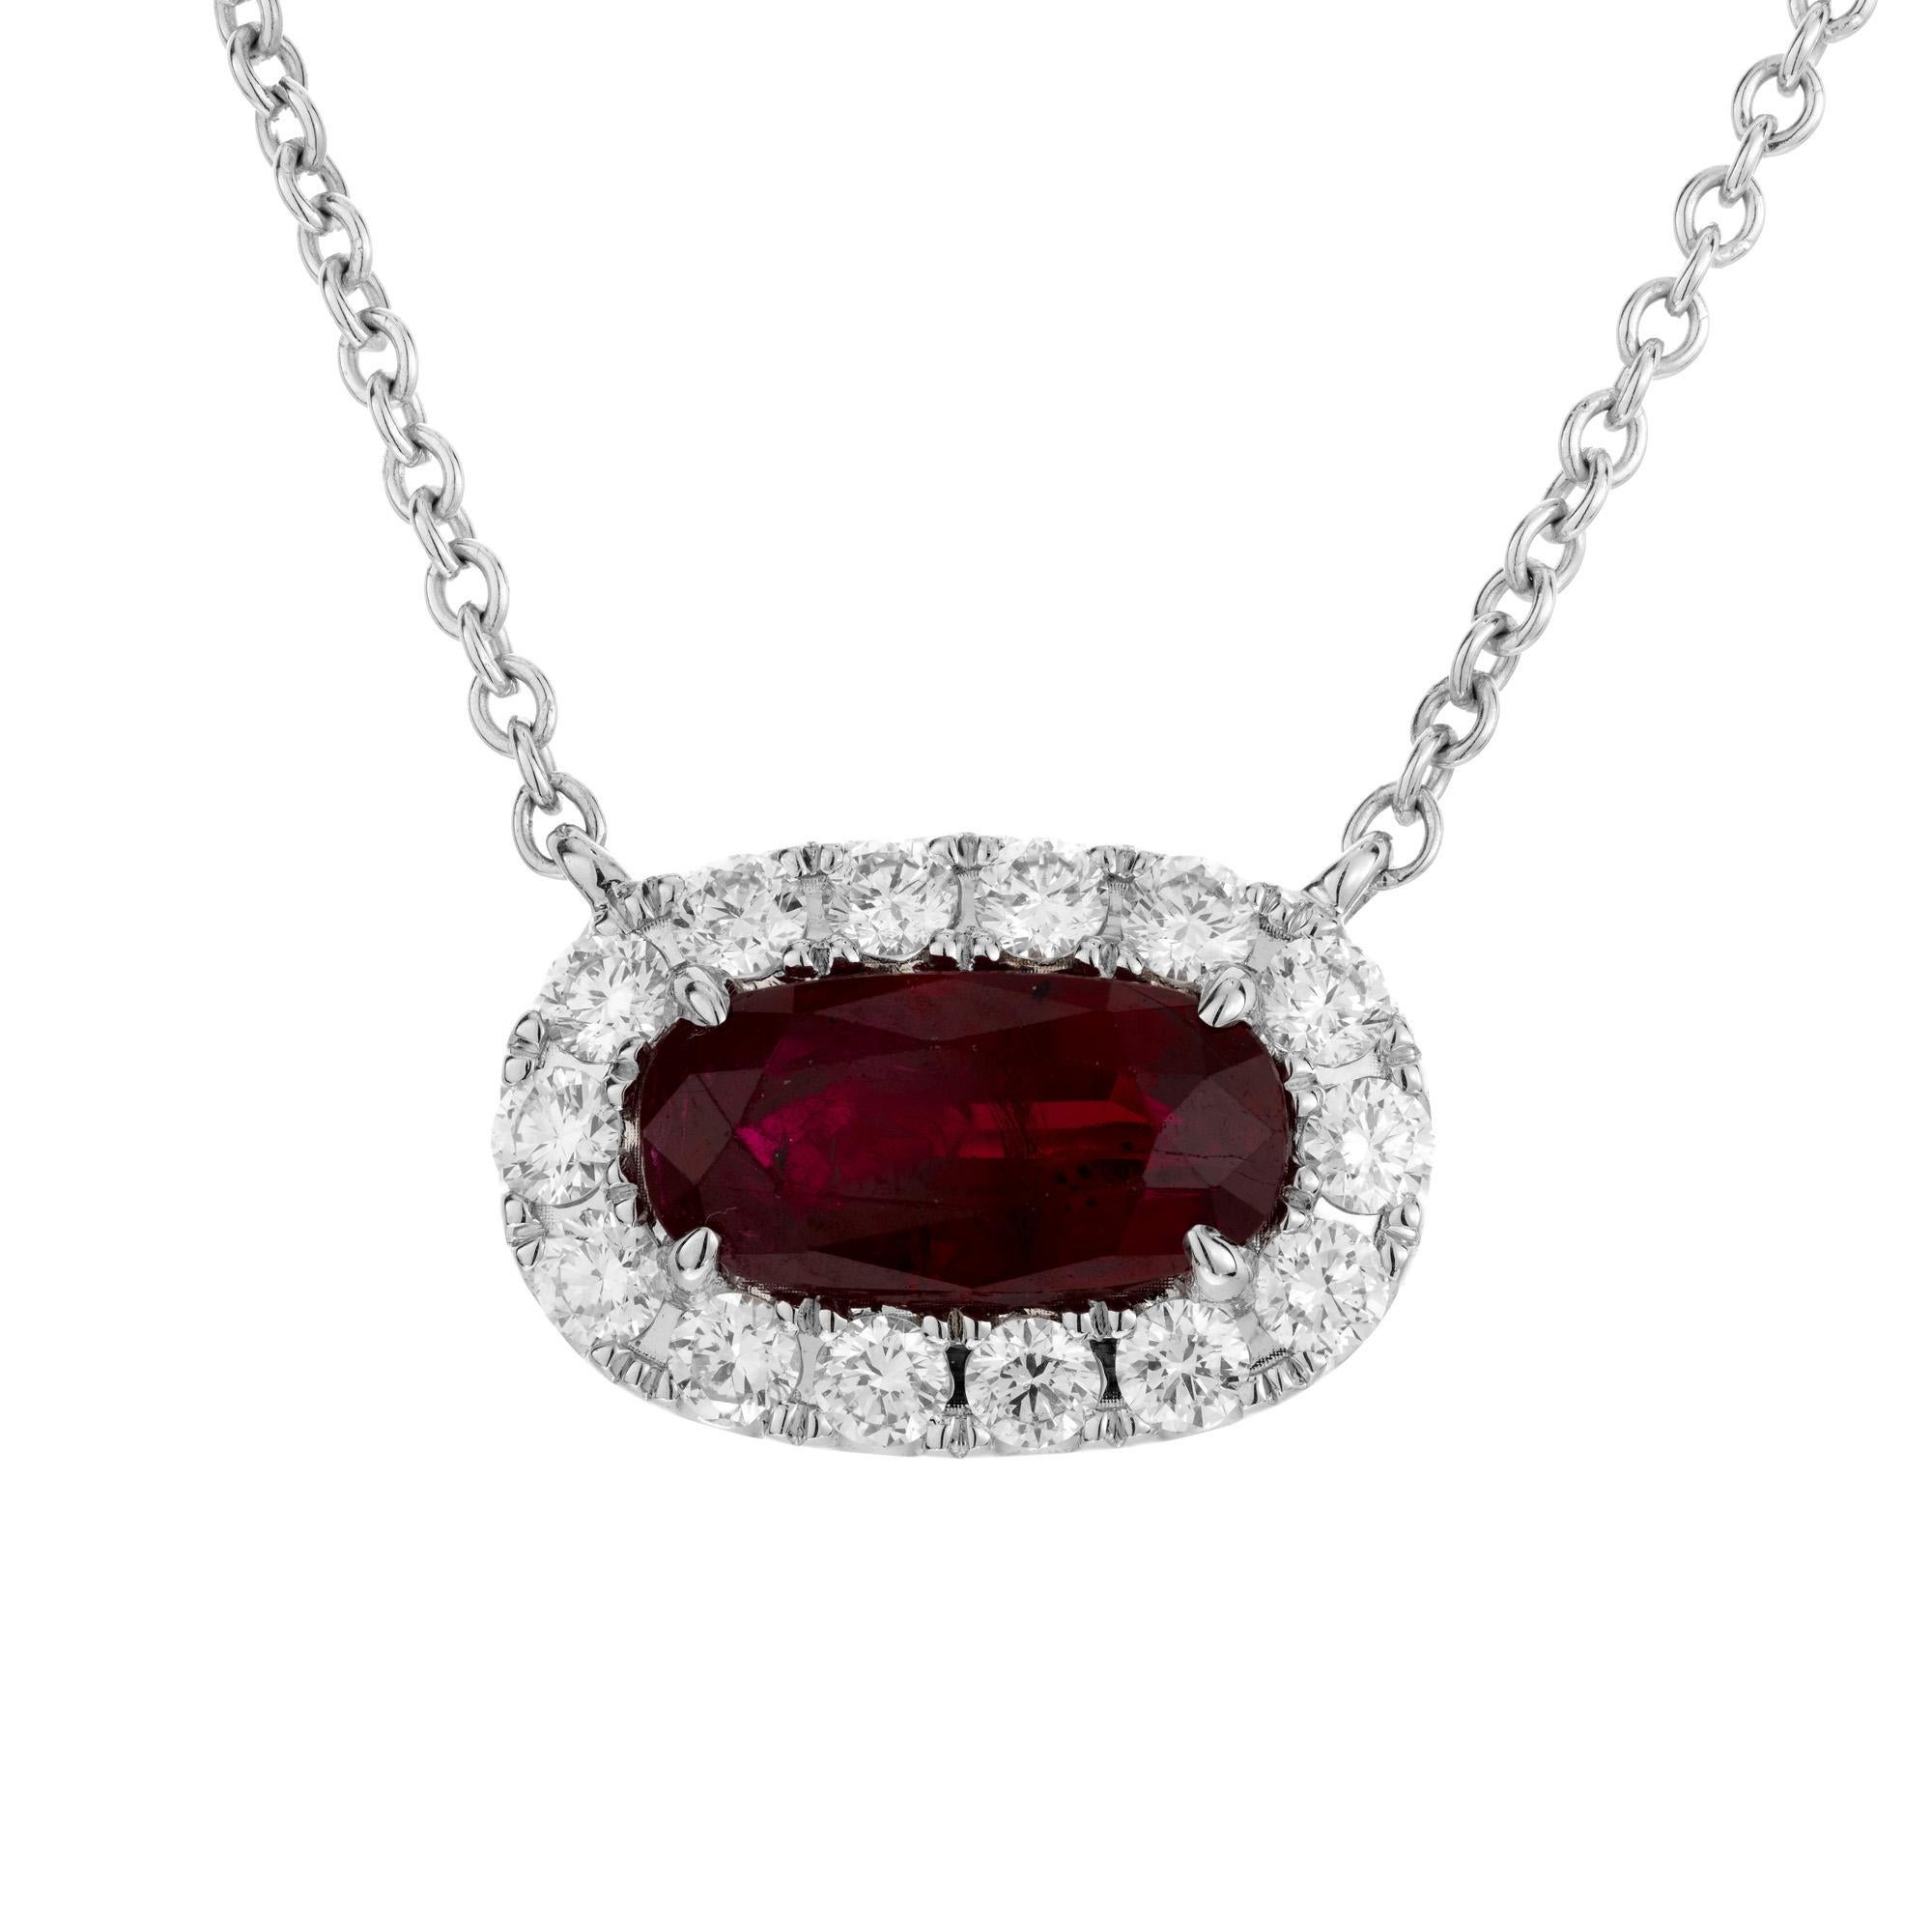 This stunning piece features a vibrant 1.35 carat oval ruby. The ruby is expertly set sideways in the pendant and is adorned with a halo of 14 round brilliant cut diamonds. The GIA has certified the ruby as simple heat only. The chain is 18k white